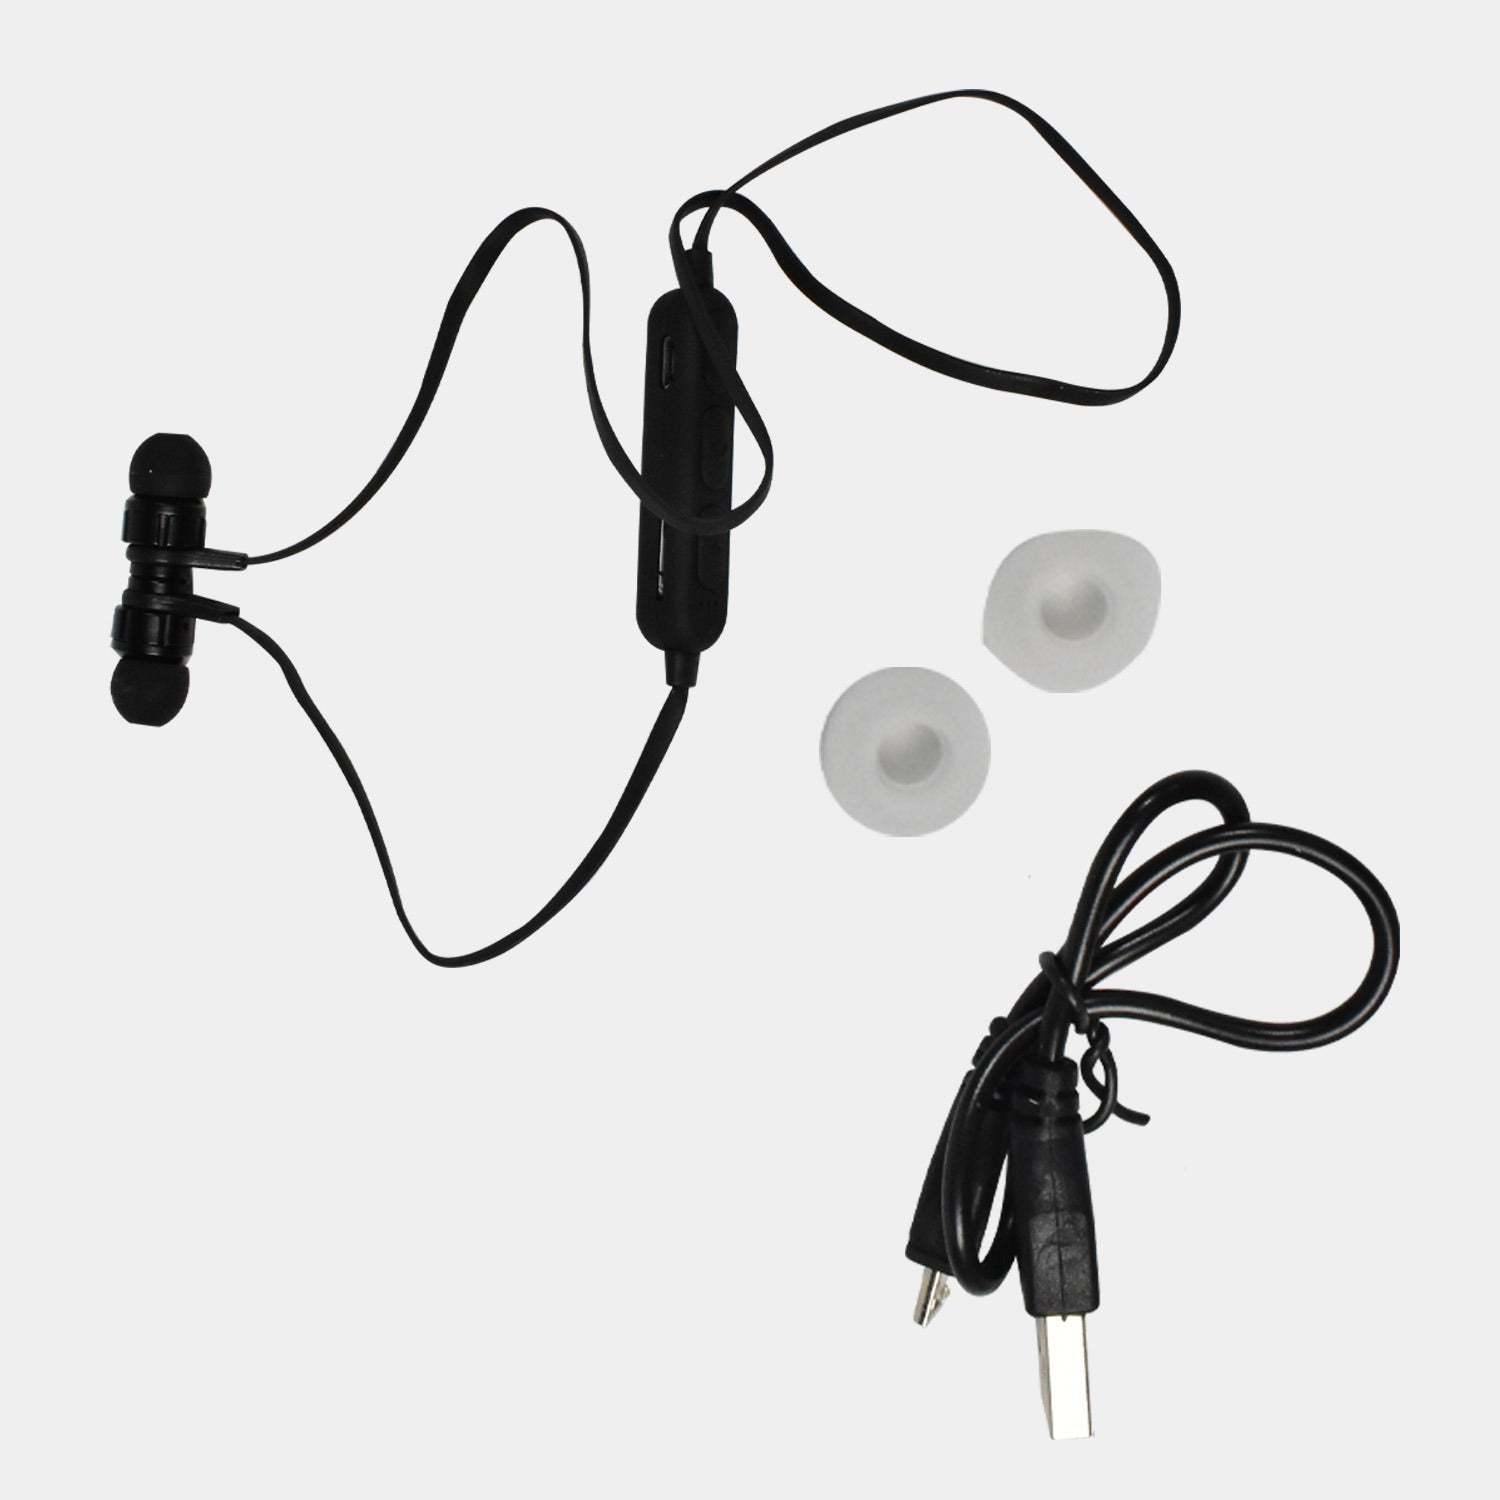 6395 WIRED EARPHONE WITH MIC FASHION, HEADPHONE COMPATIBLE FOR ALL MOBILE PHONES TABLETS LAPTOPS COMPUTERS ( 1pc ) 